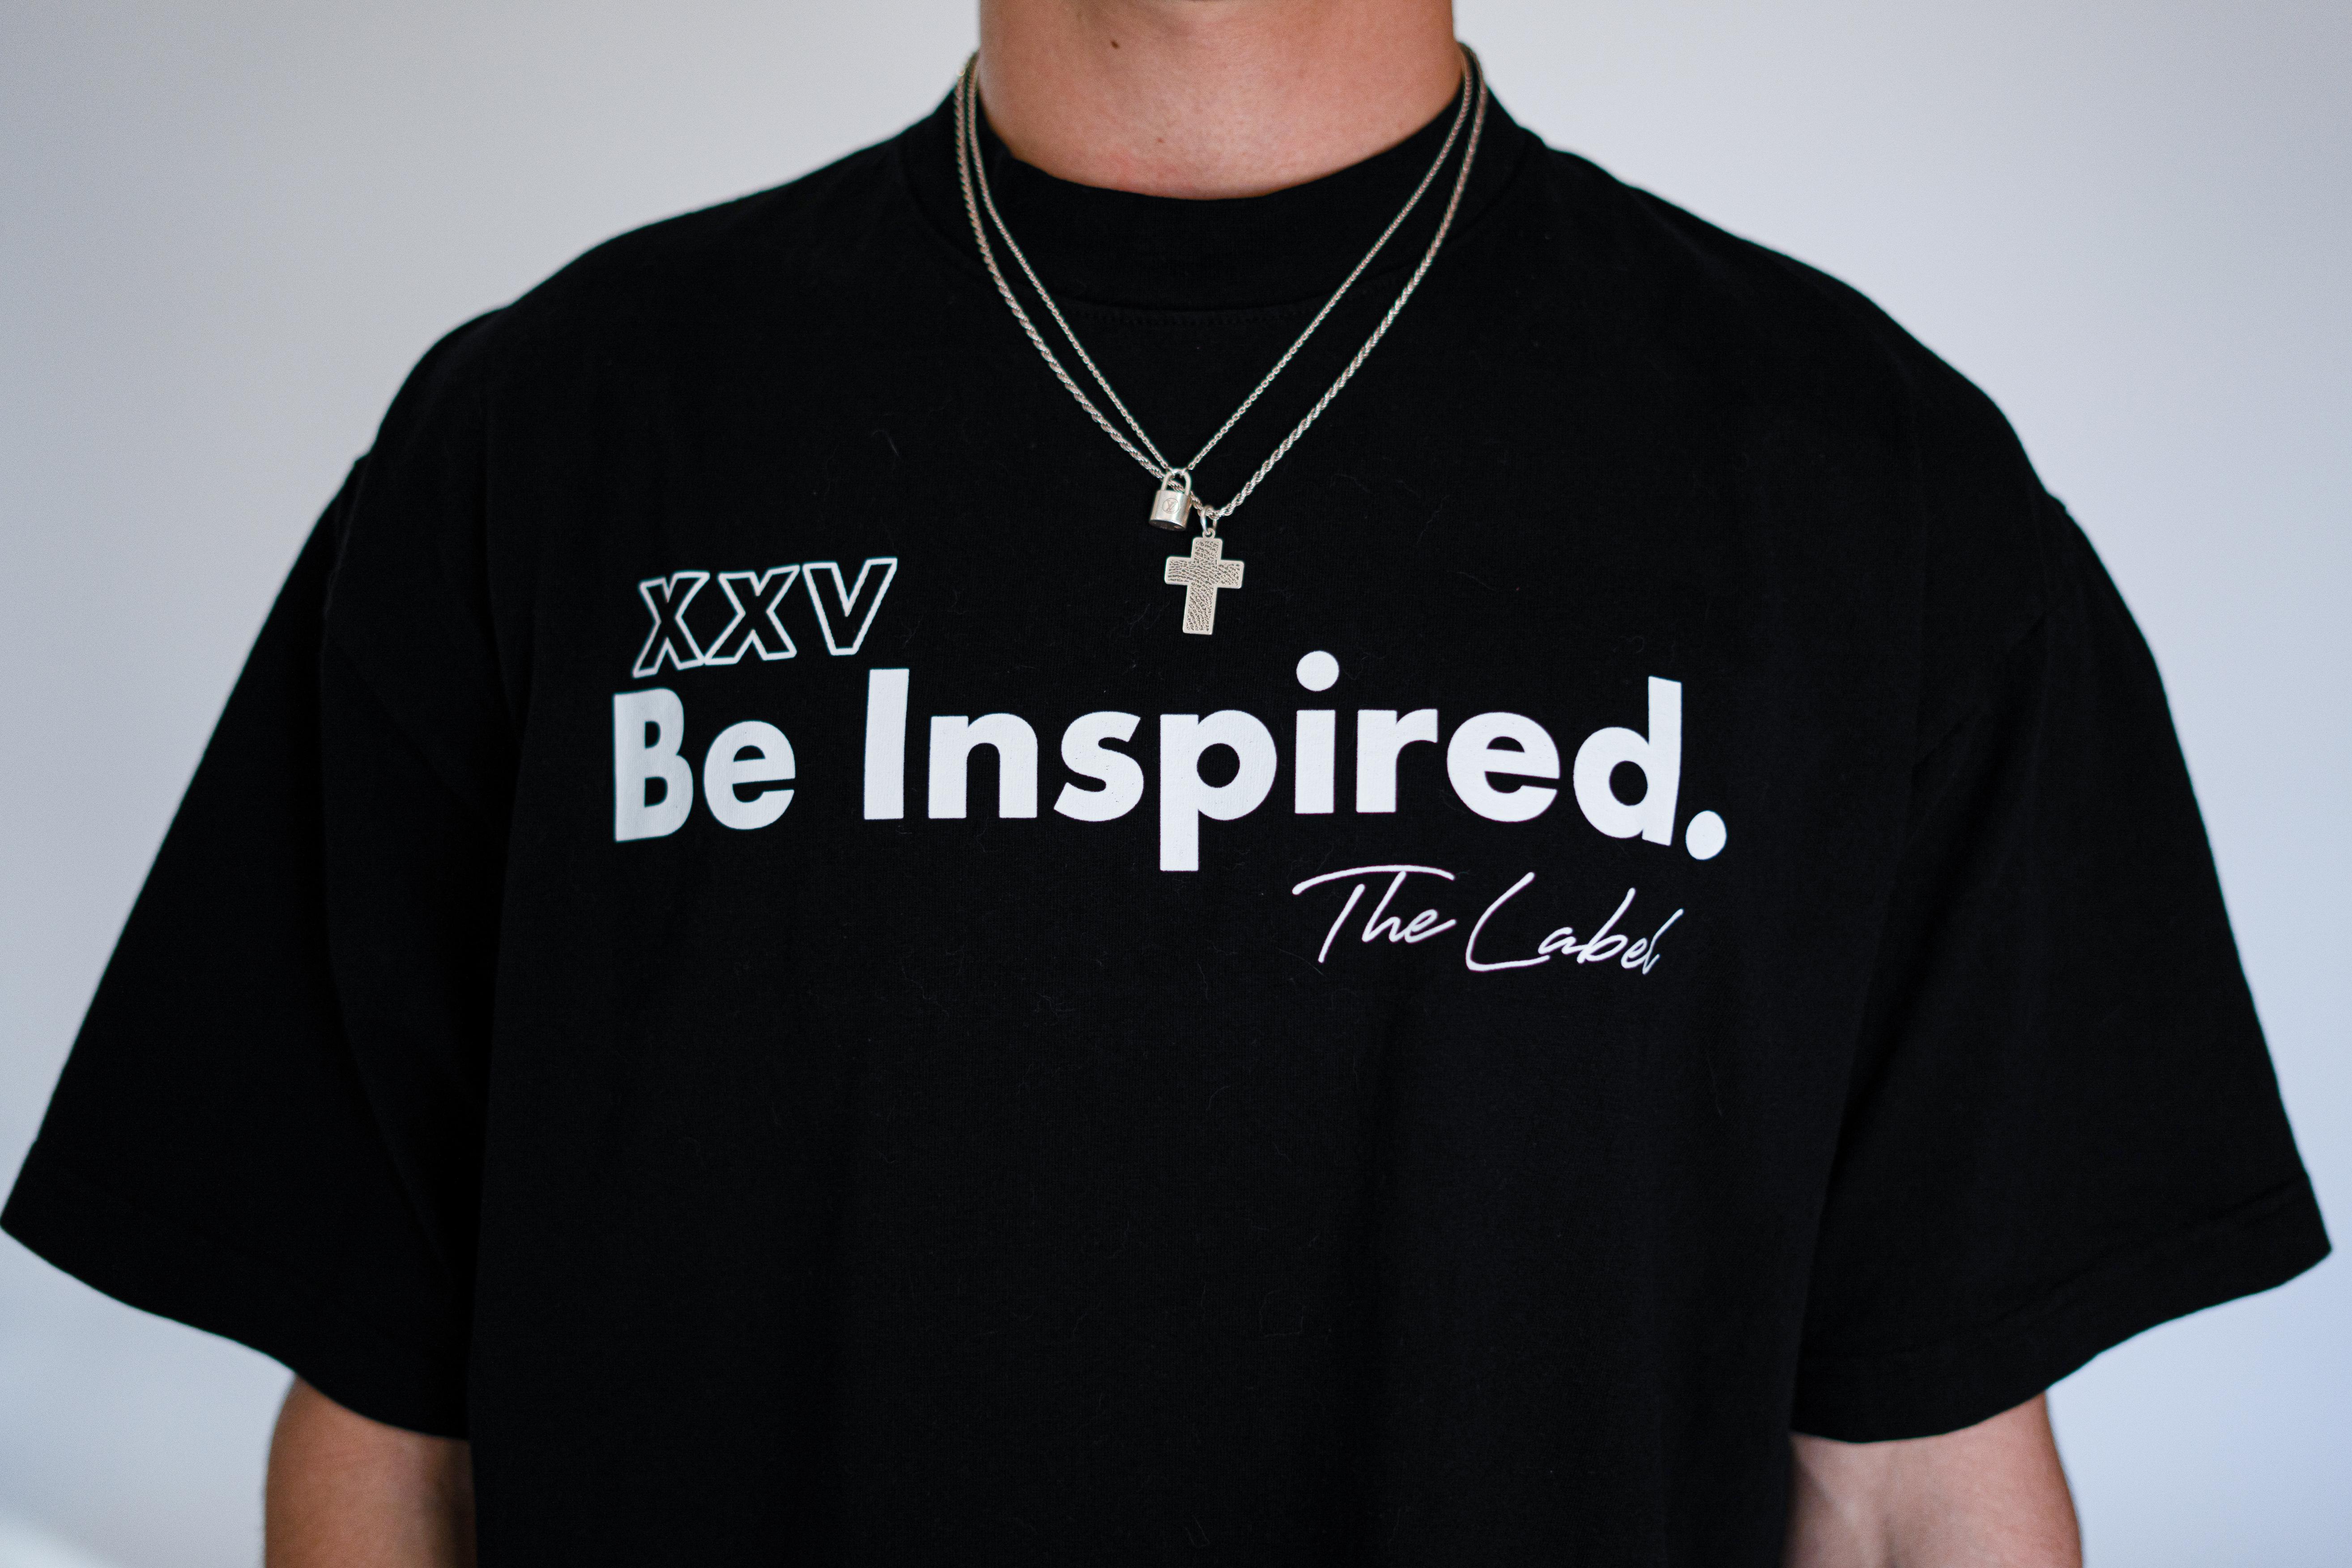 XXV Be Inspired.